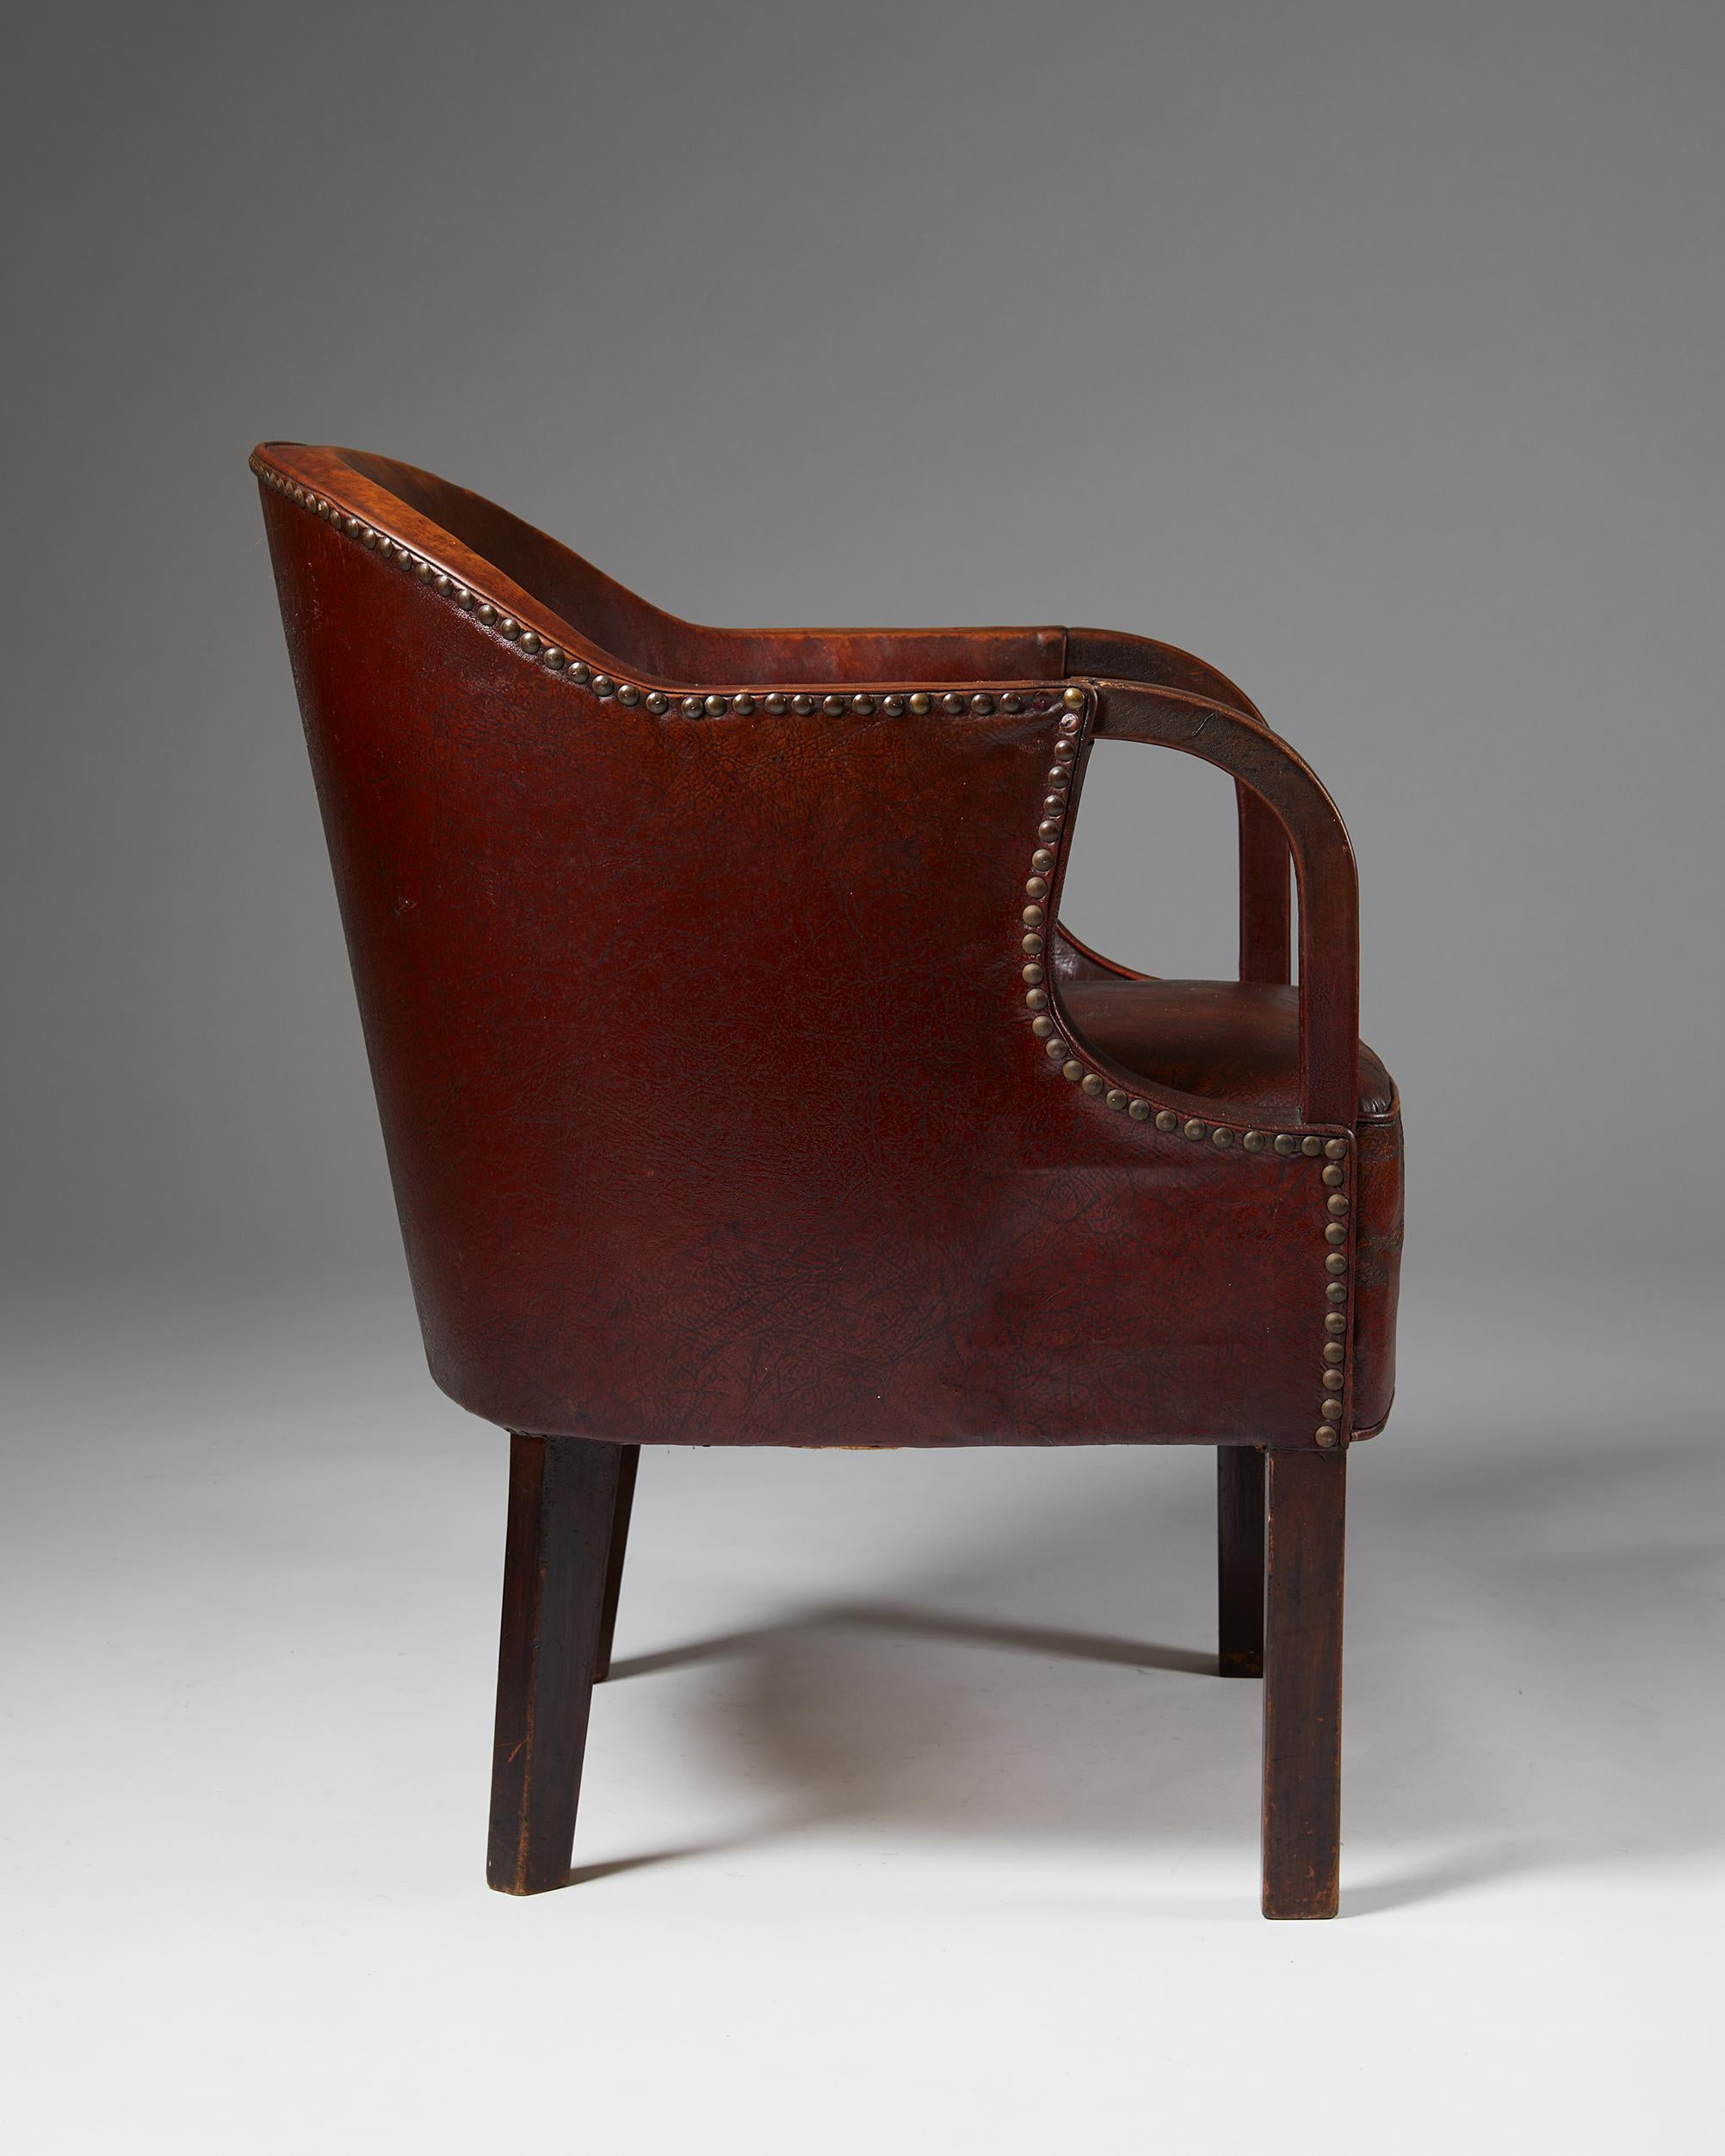 Danish Lounge Chair, Designed by Kay Fisker